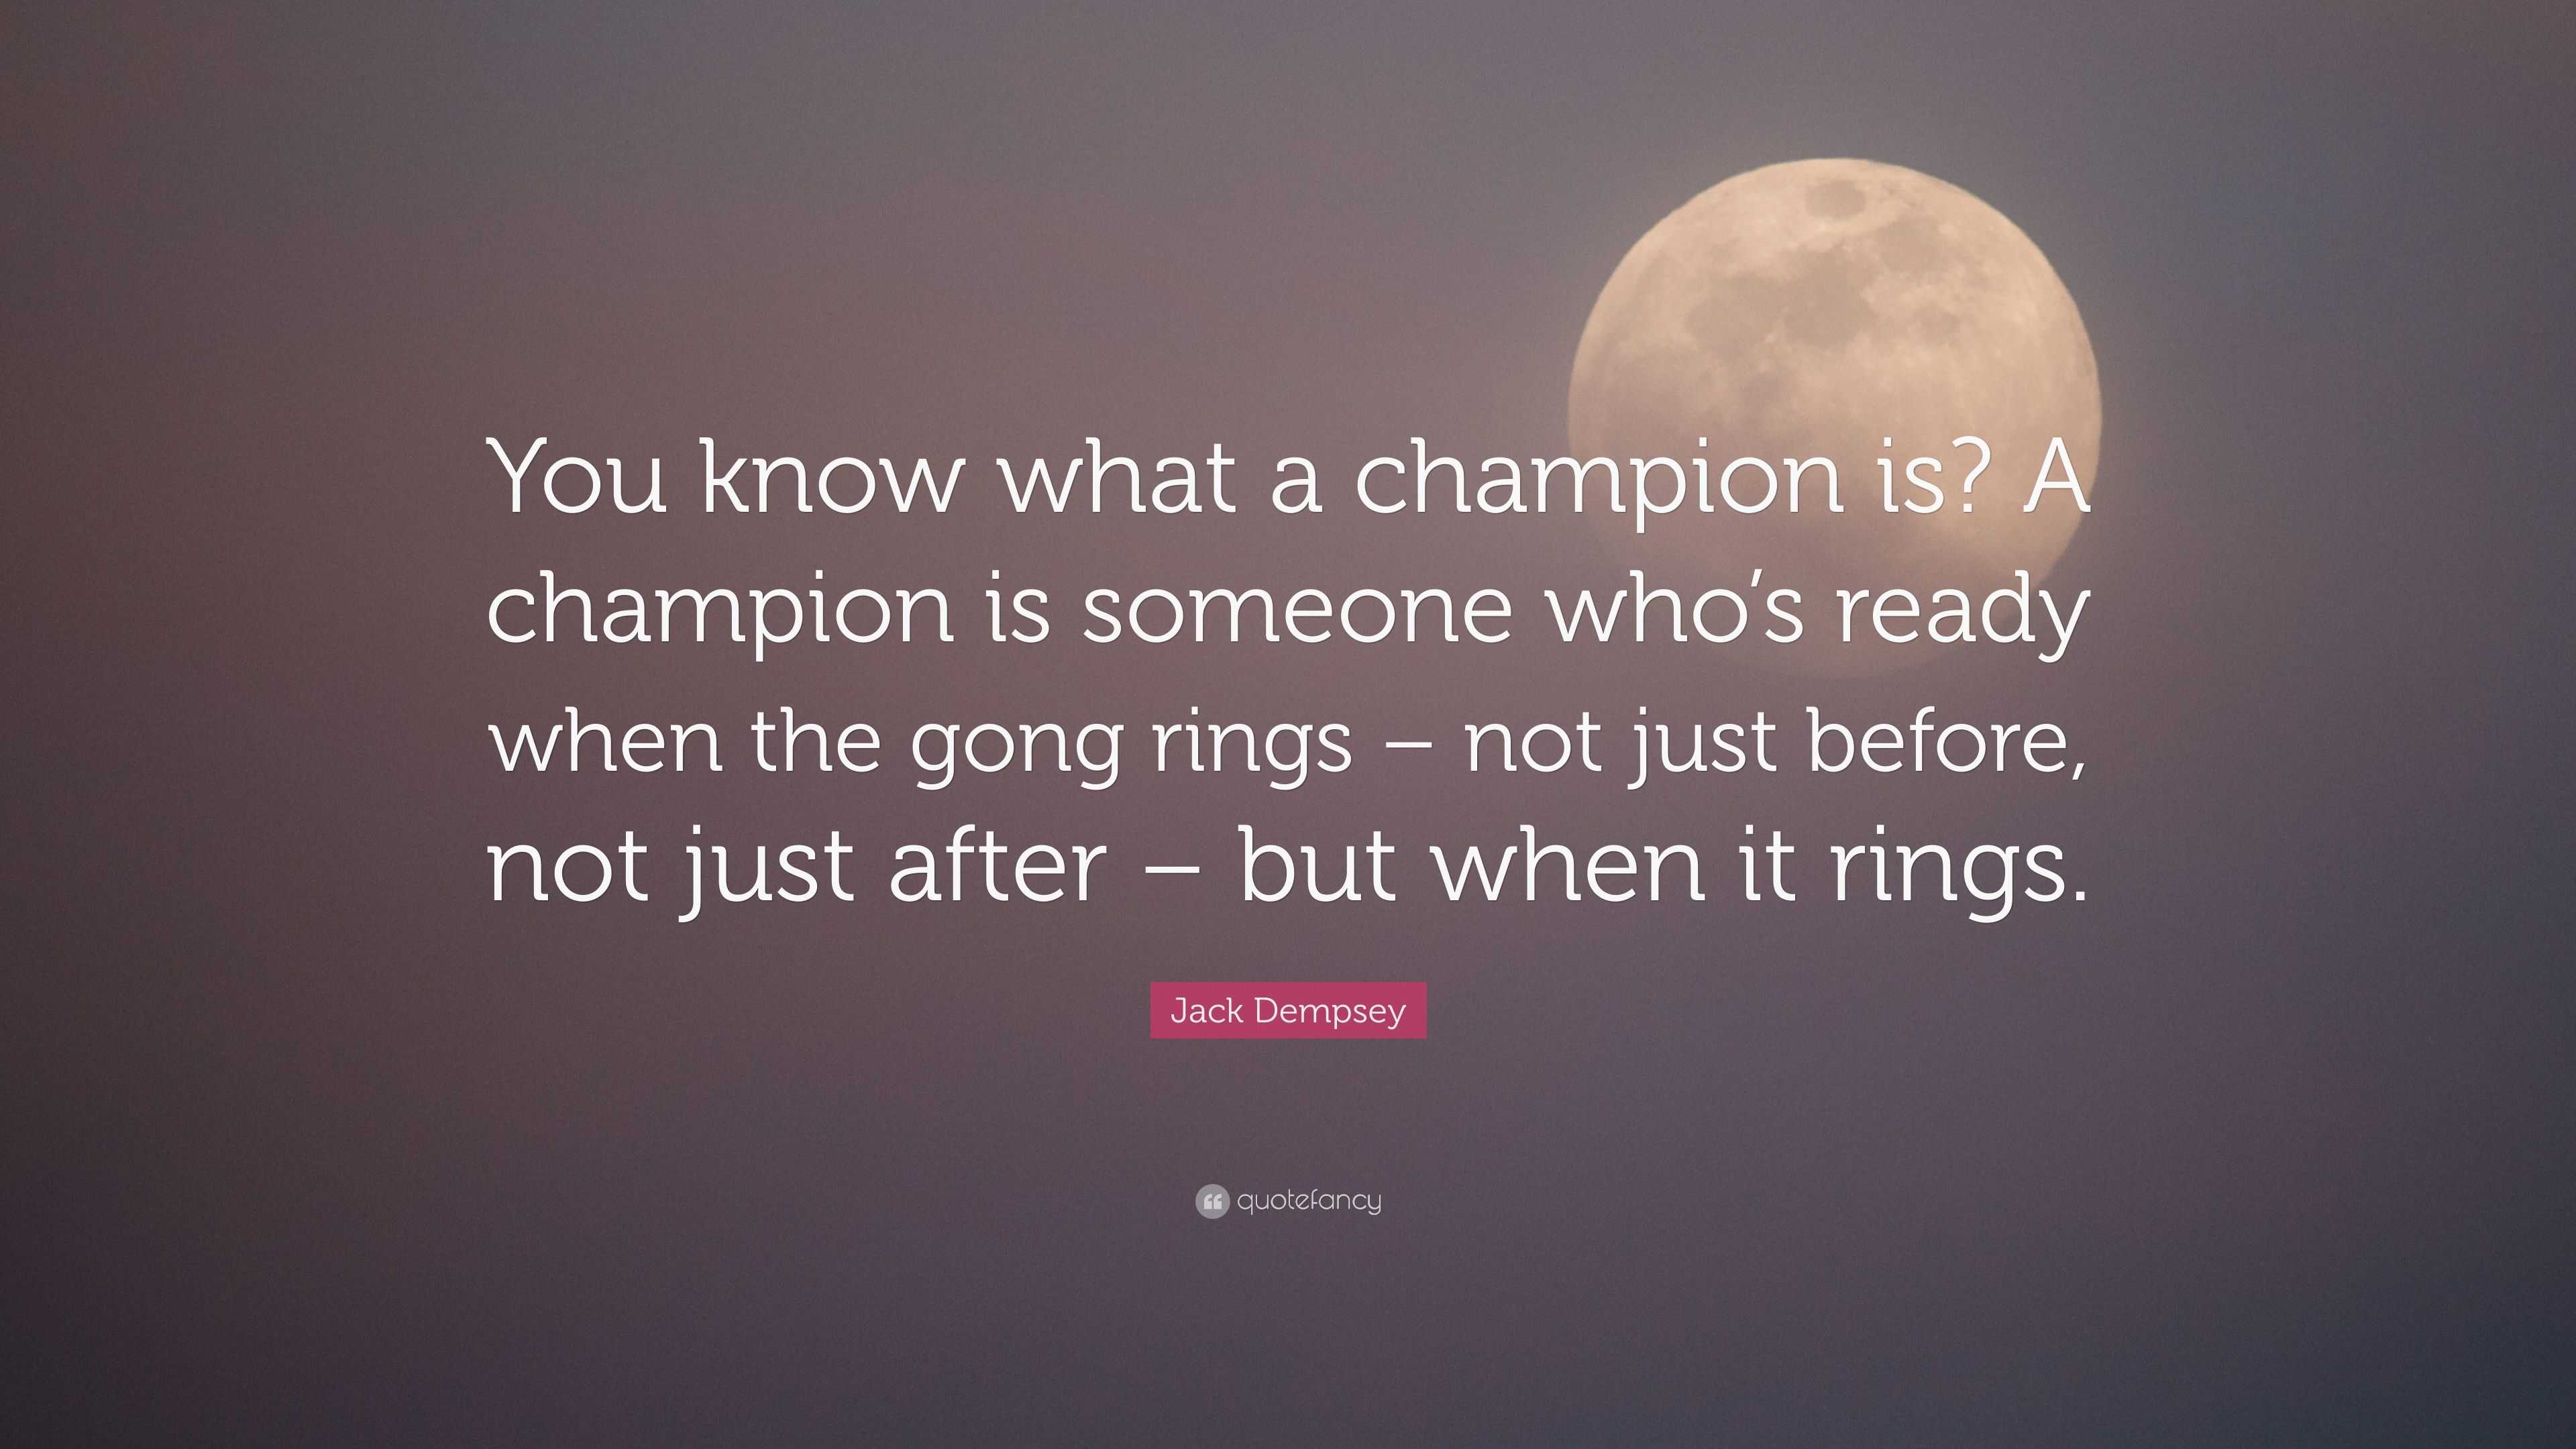 piedestal Konkret guitar Jack Dempsey Quote: “You know what a champion is? A champion is someone  who's ready when the gong rings – not just before, not just after – b...”